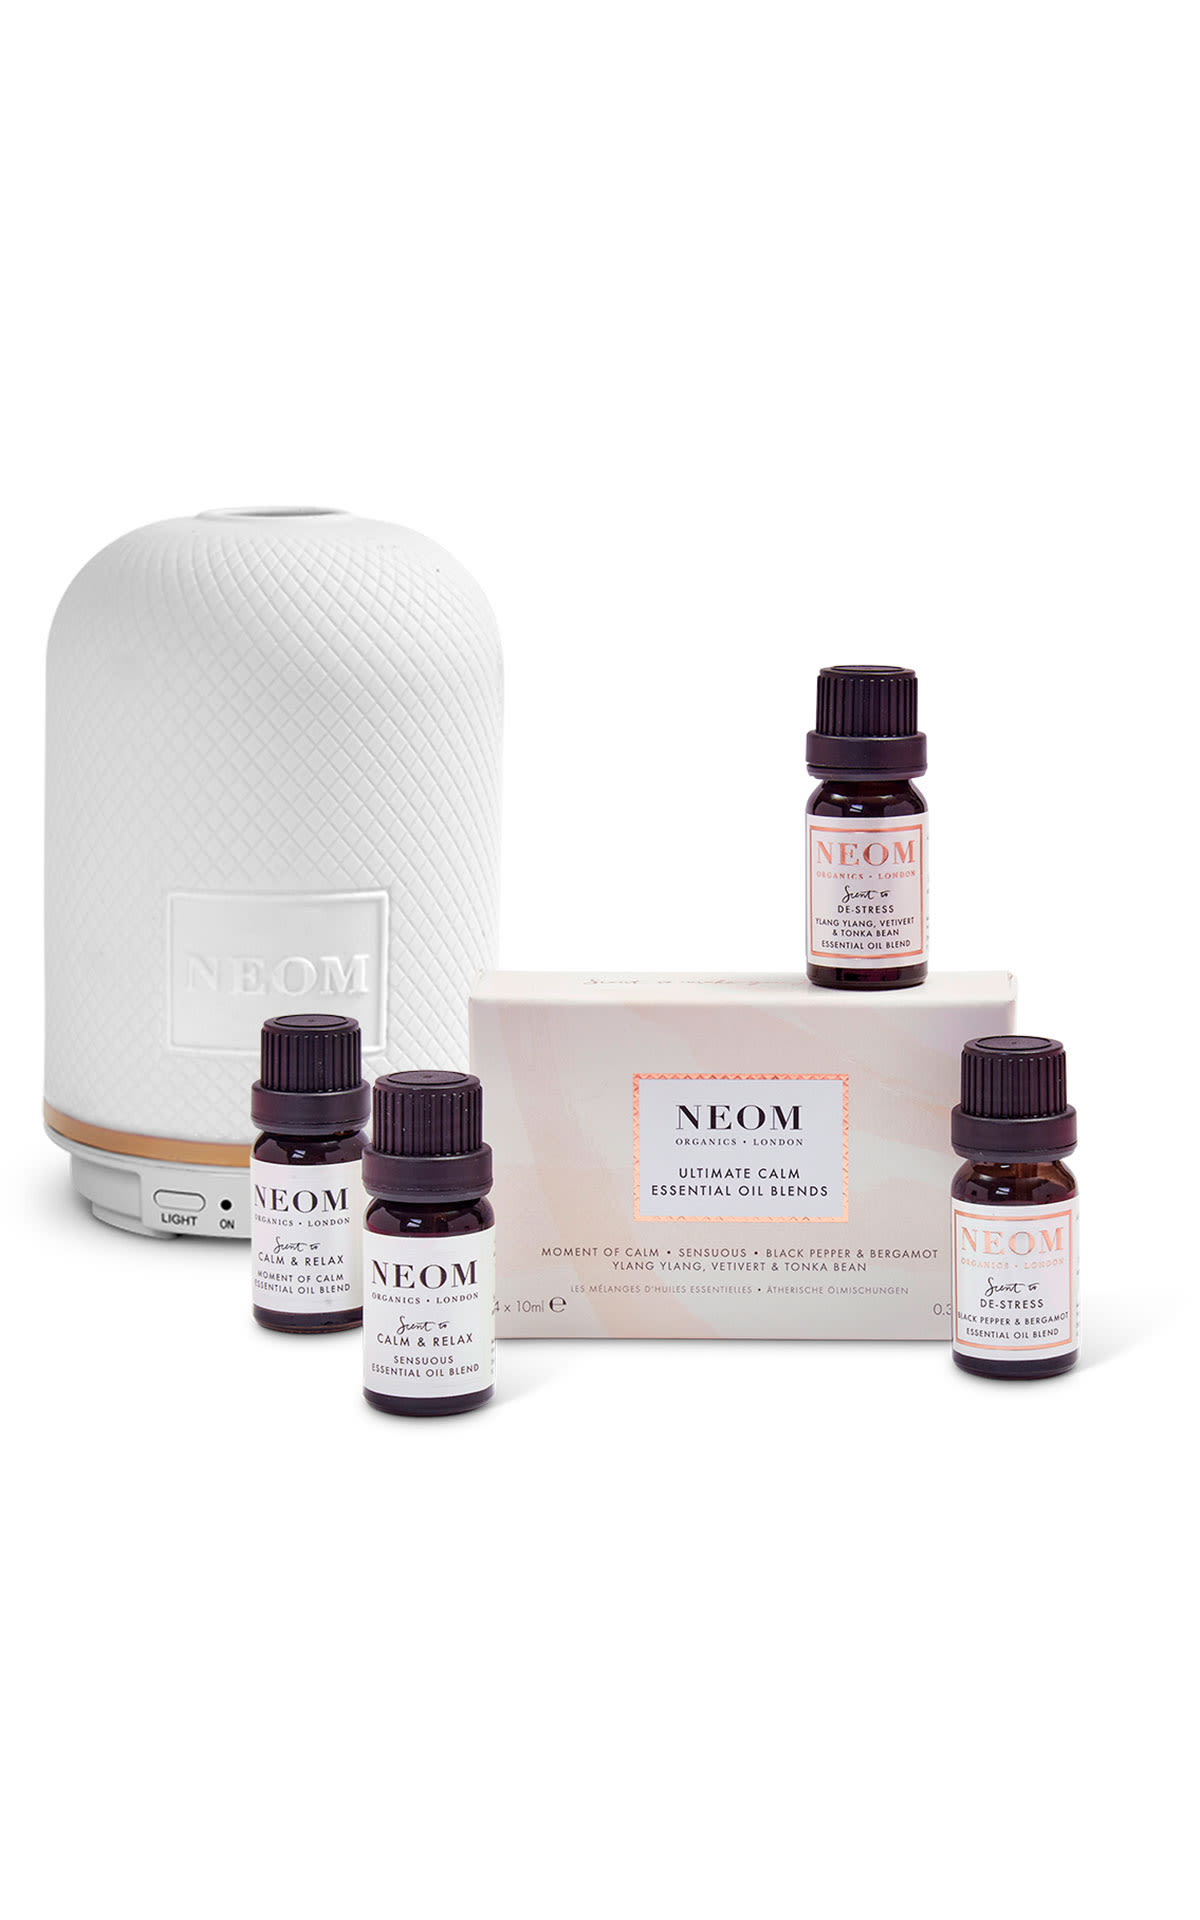 NEOM Pod and oil ultimate calm from Bicester Village